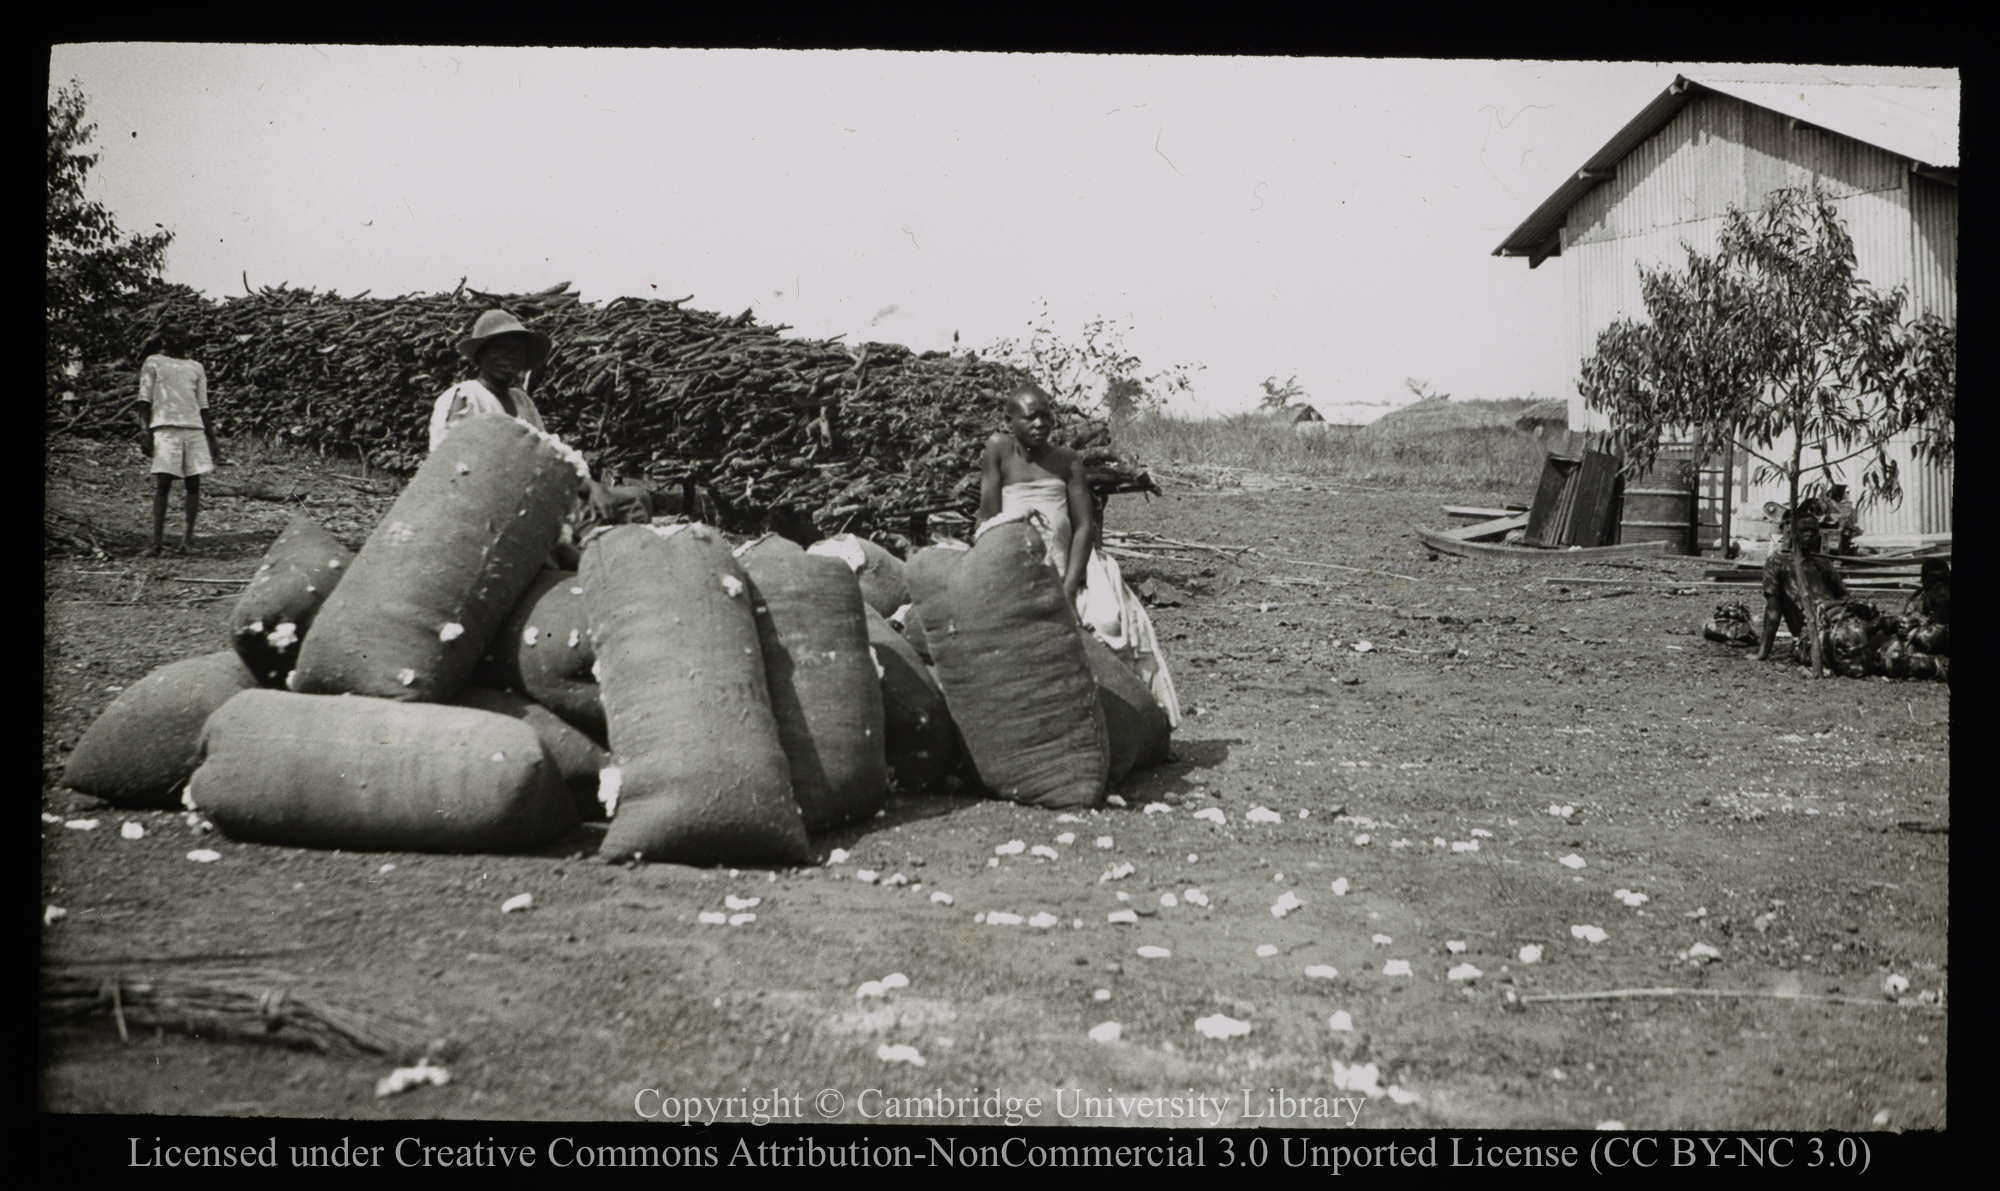 Workers with filled sacks, 1937